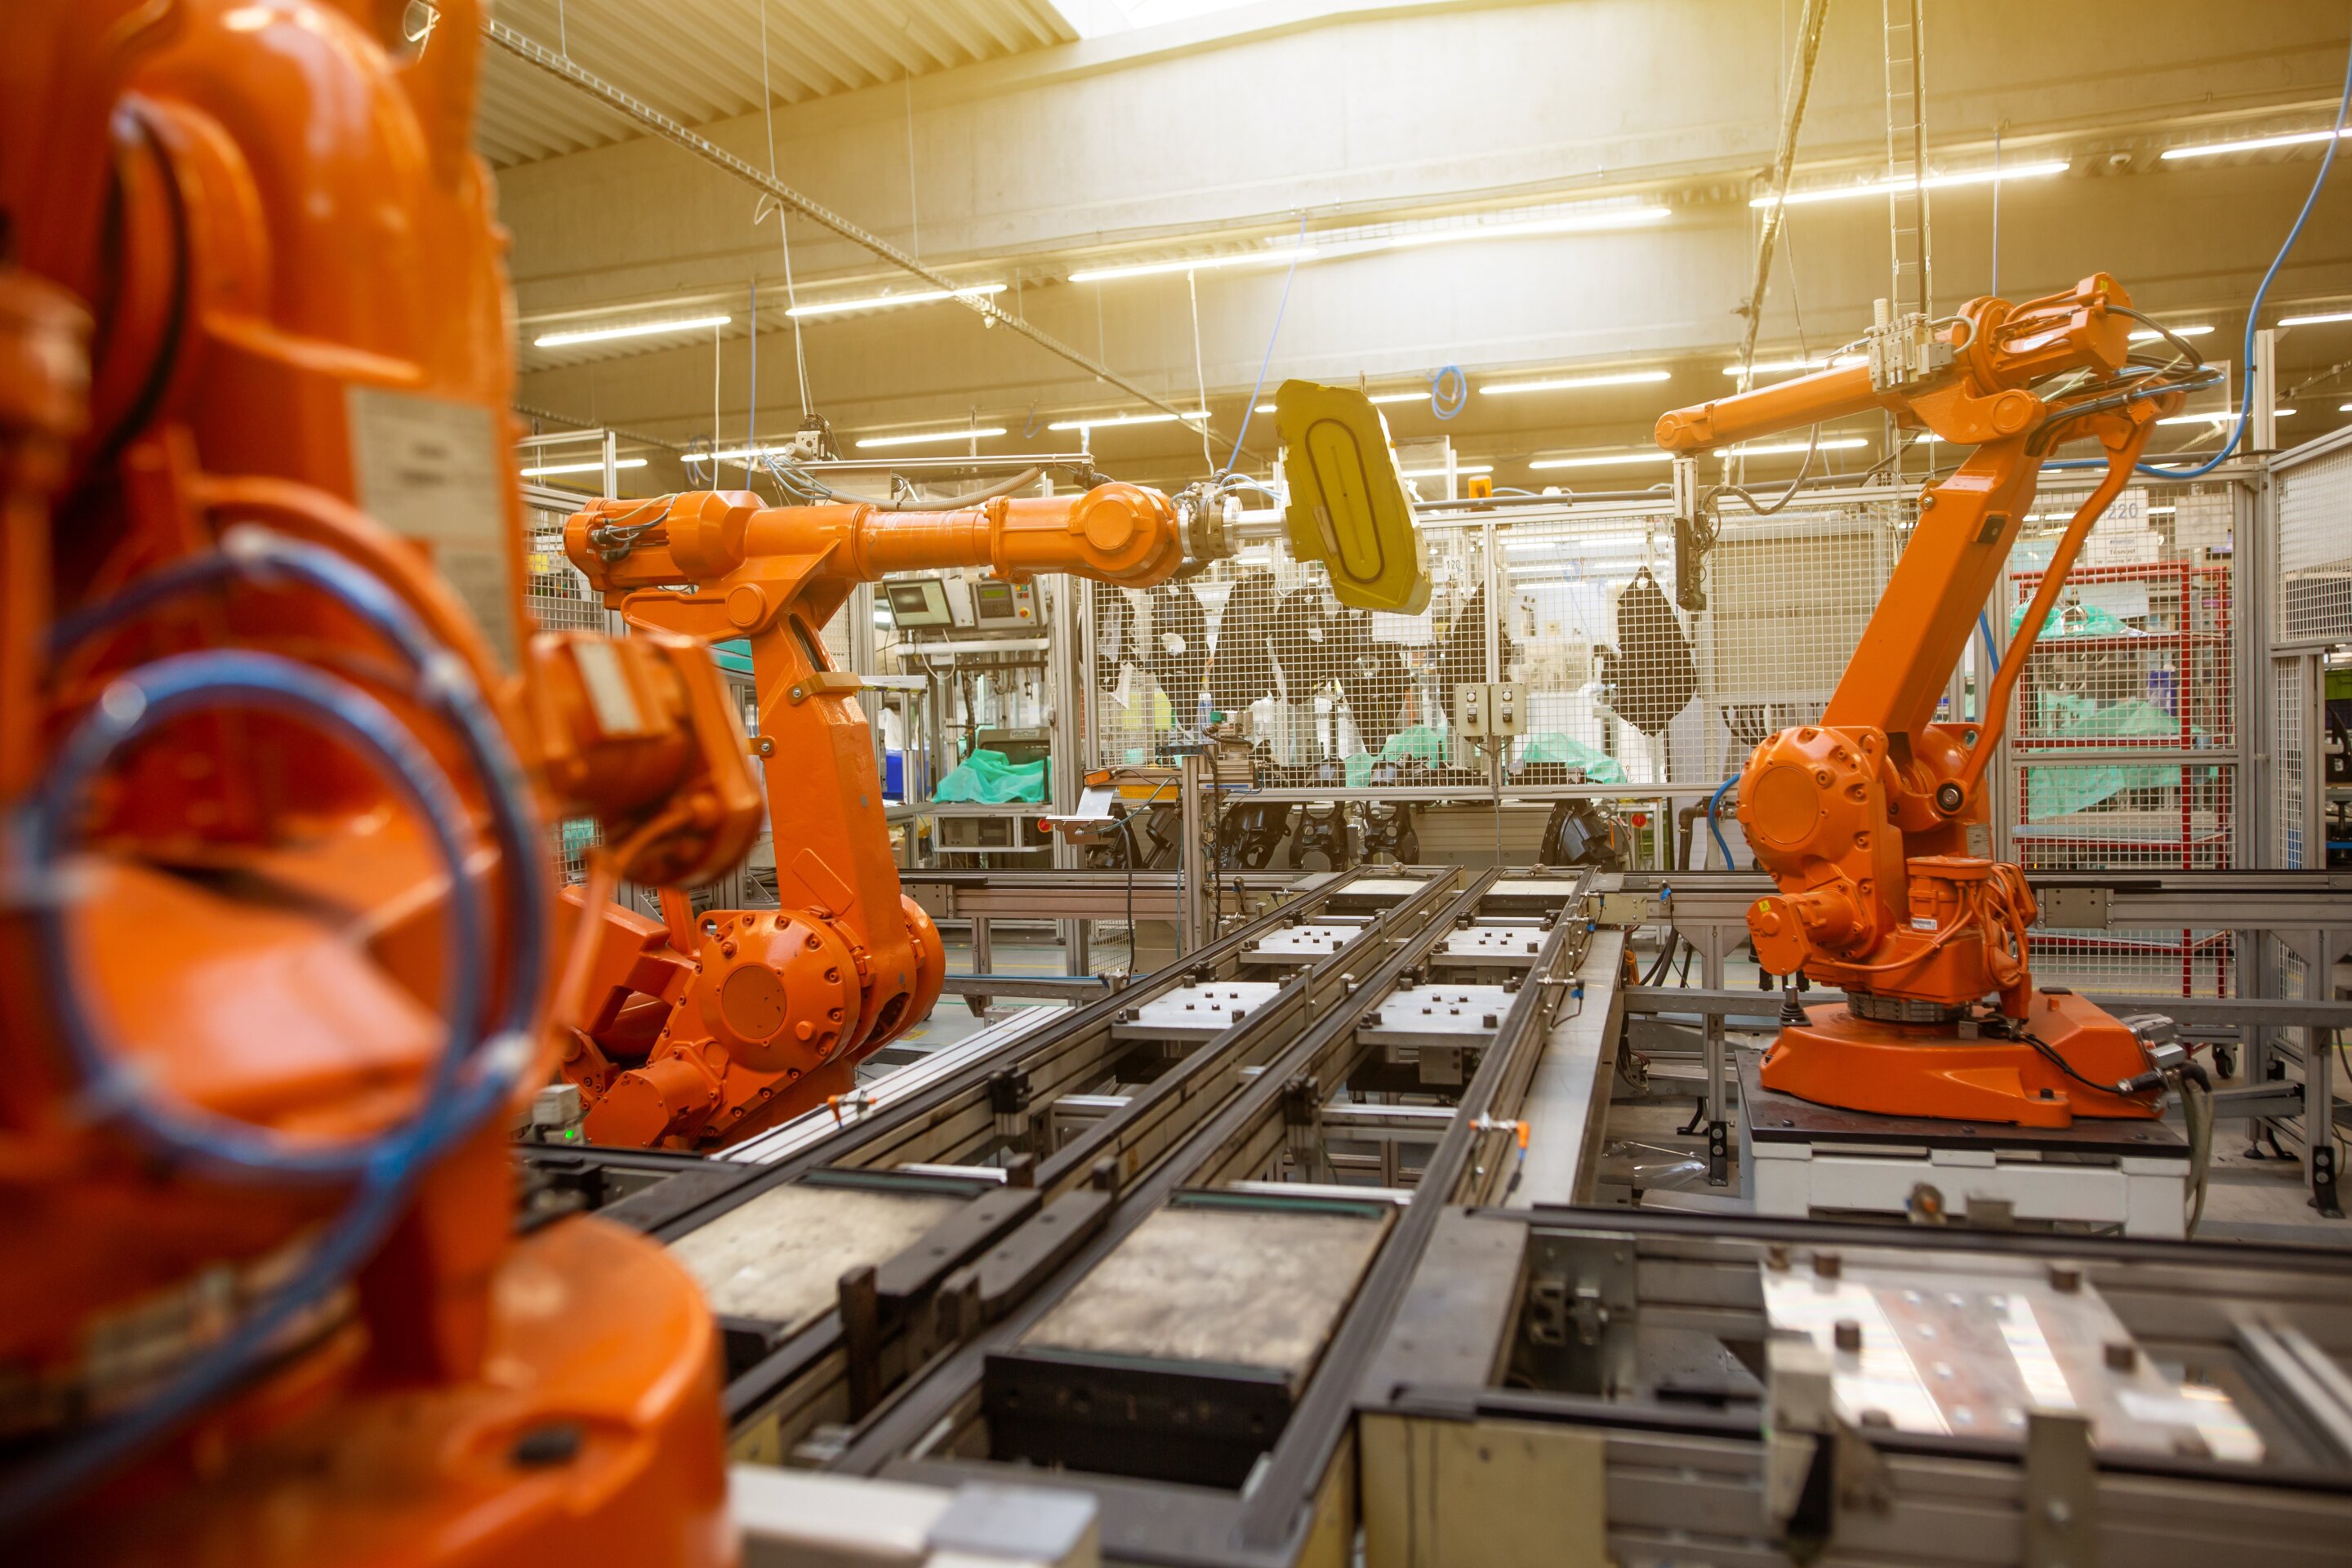 The next generation of American manufacturing is high-tech, and skilled workers are needed